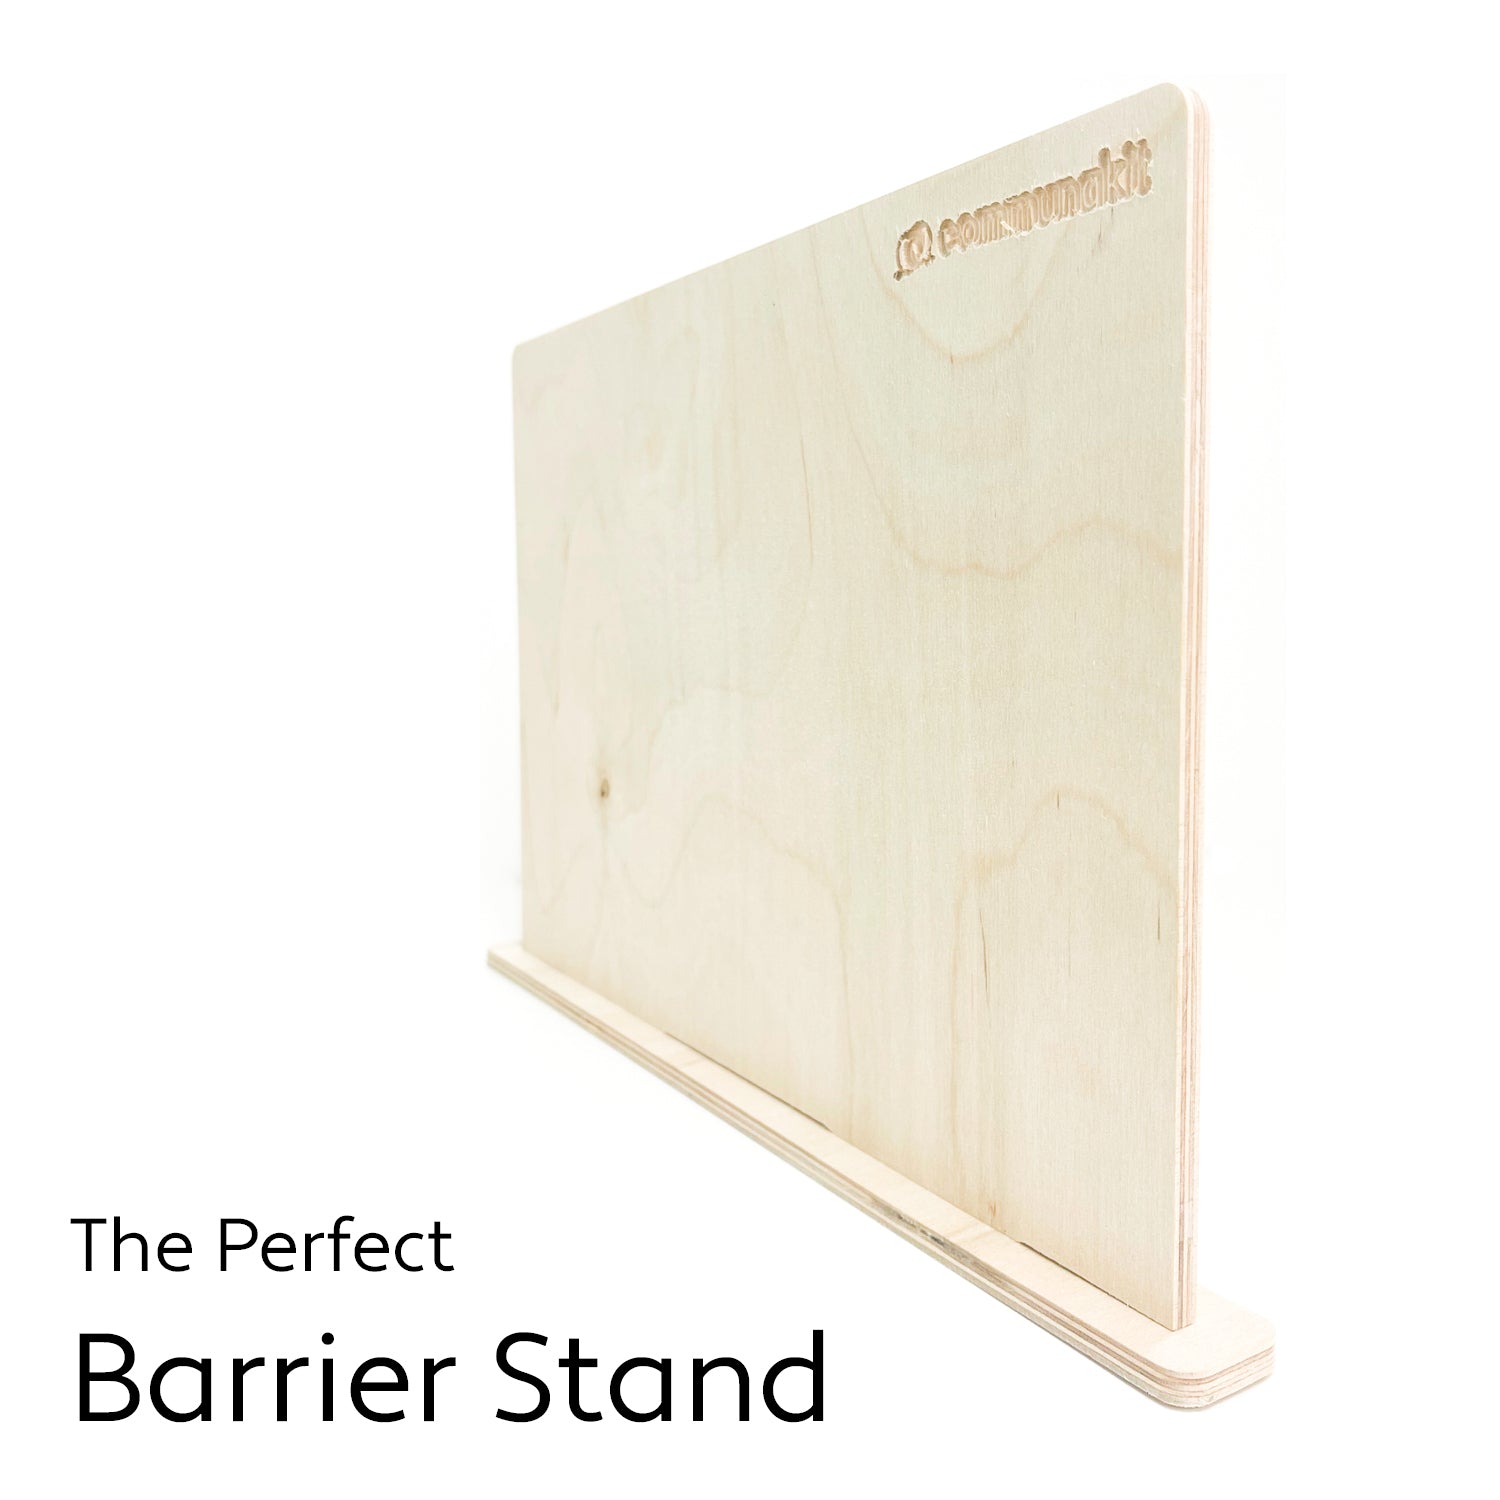 The Perfect Barrier Stand